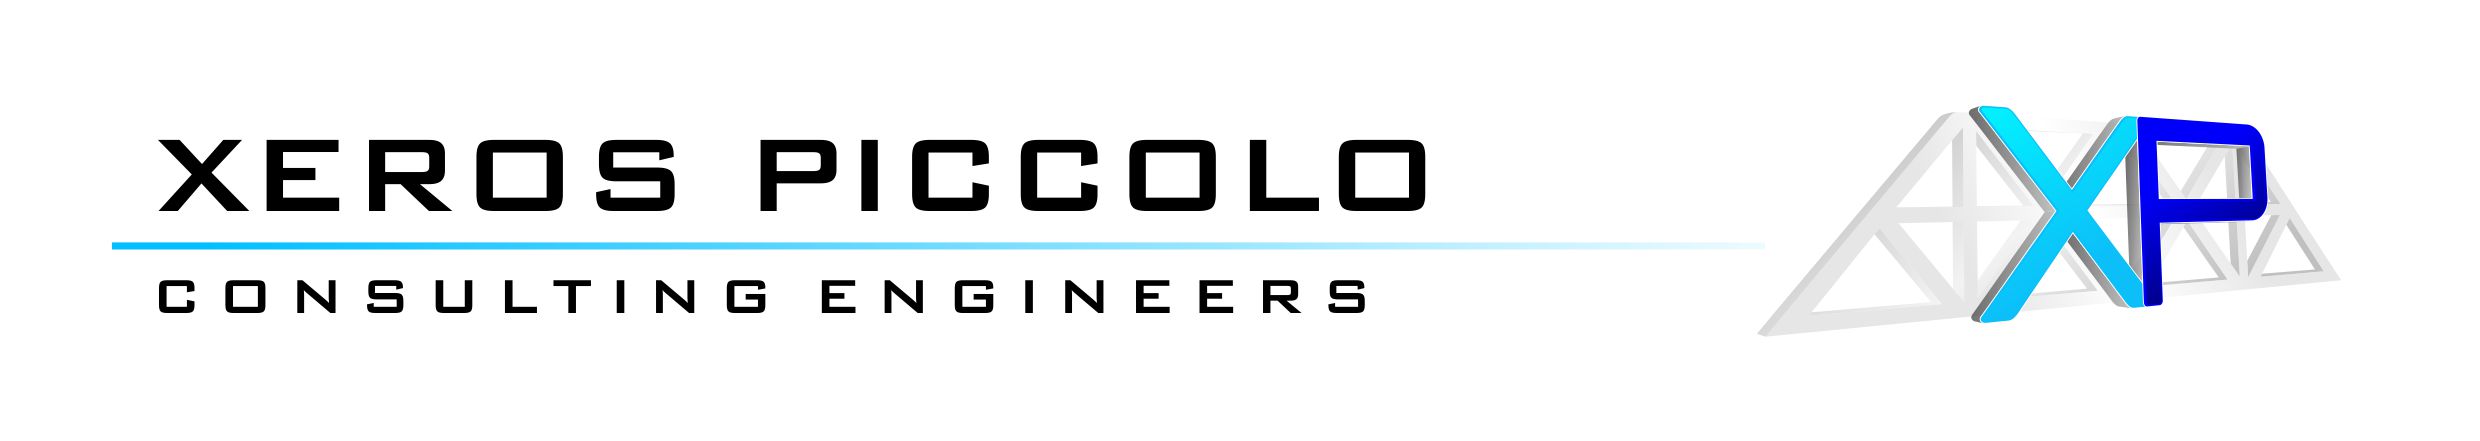 Xeros Piccolo Consulting Engineers